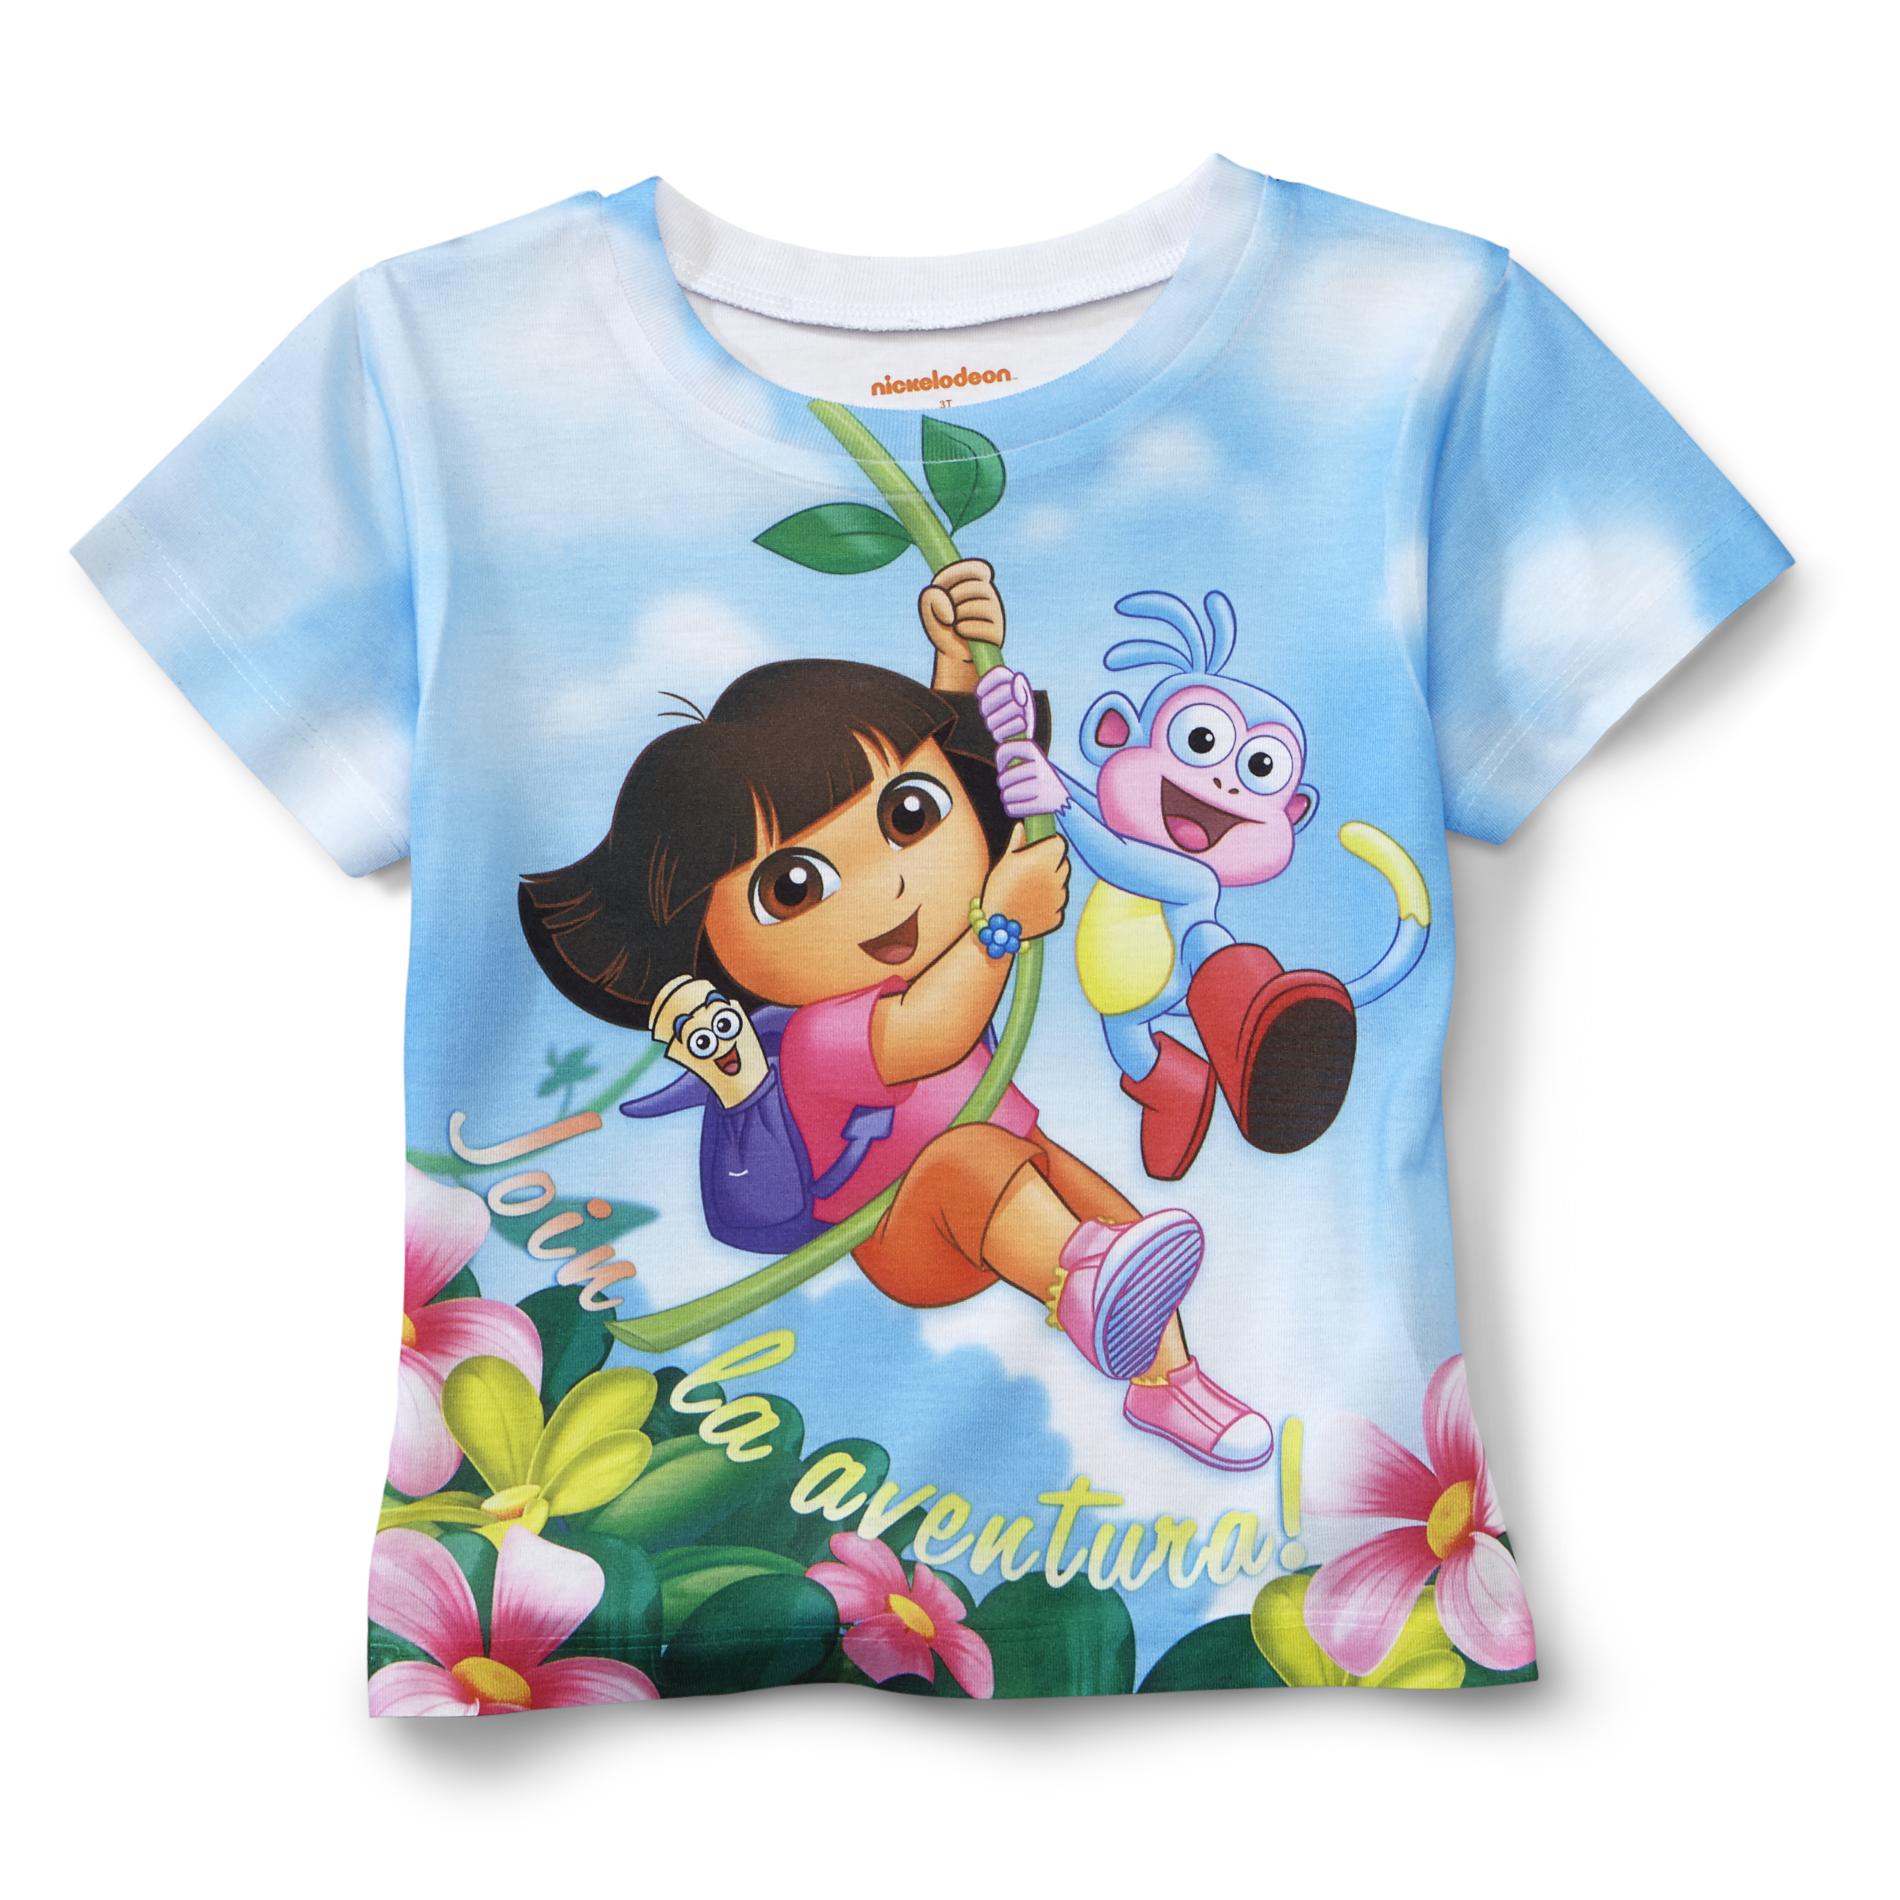 Nickelodeon Toddler Girl's Sublimation T-Shirt - Dora & Boots